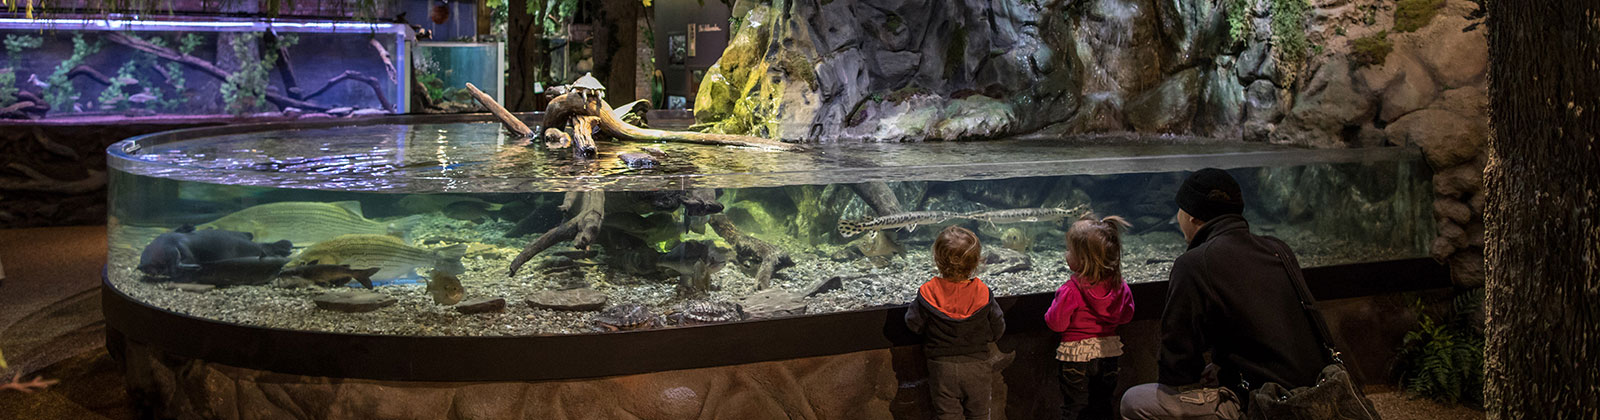 Ohio Lakes And Rivers at Greater Cleveland Aquarium